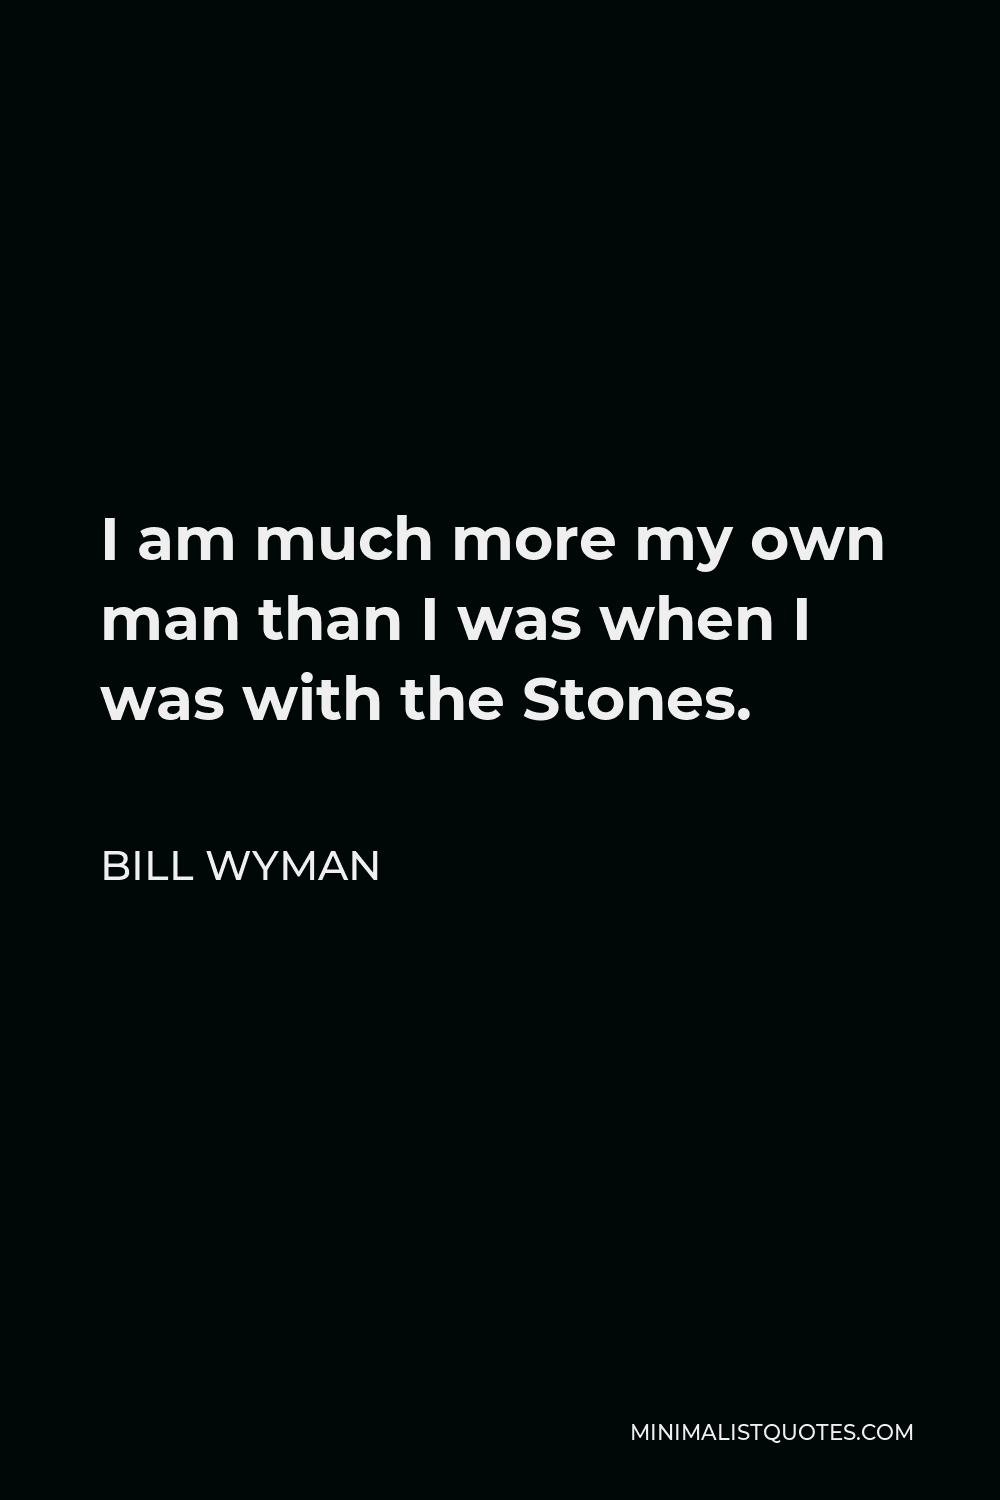 Bill Wyman Quote - I am much more my own man than I was when I was with the Stones.